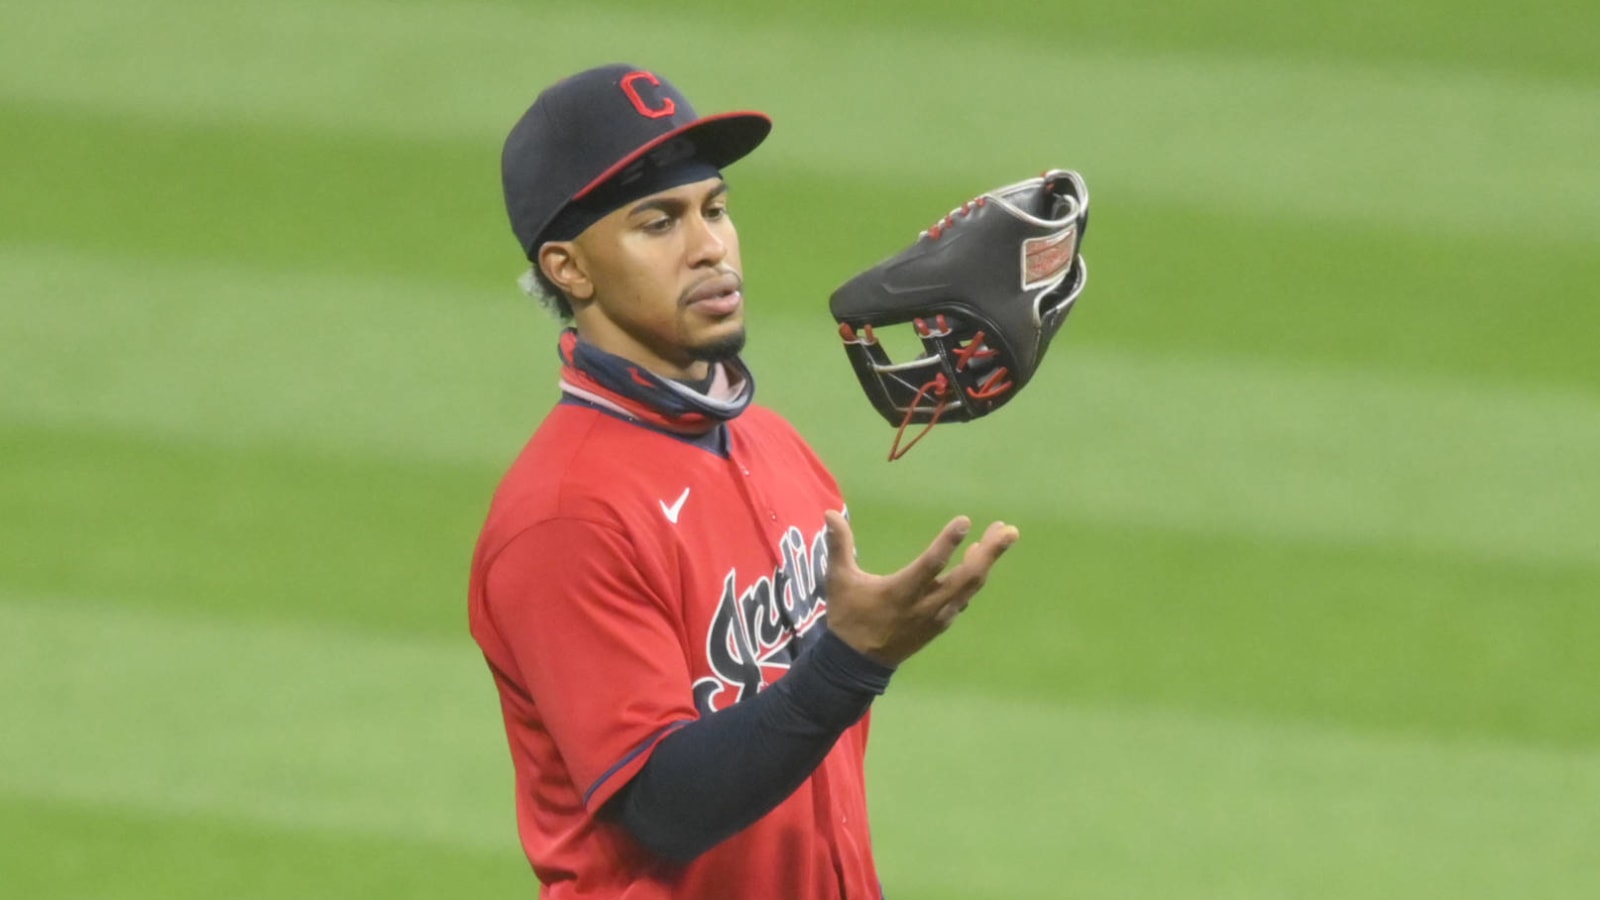 Report: Francisco Lindor trade 'unlikely to happen quickly'